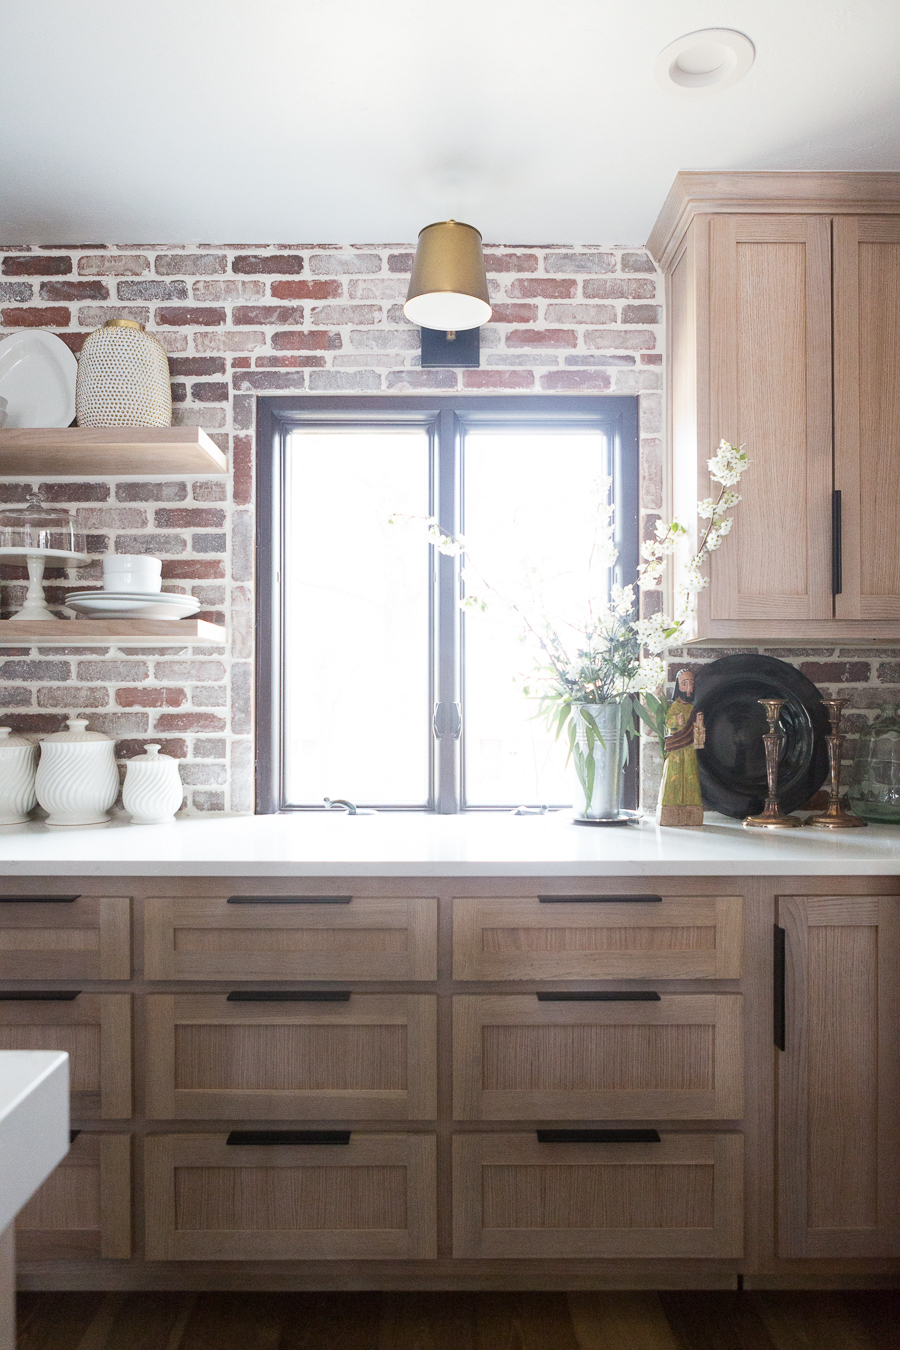 CC and Mike Kane Project Remodel Reveal brick kitchen bacskplash with a white farmhouse sink and black faucet rift sawn white oak cabinets with black hardware